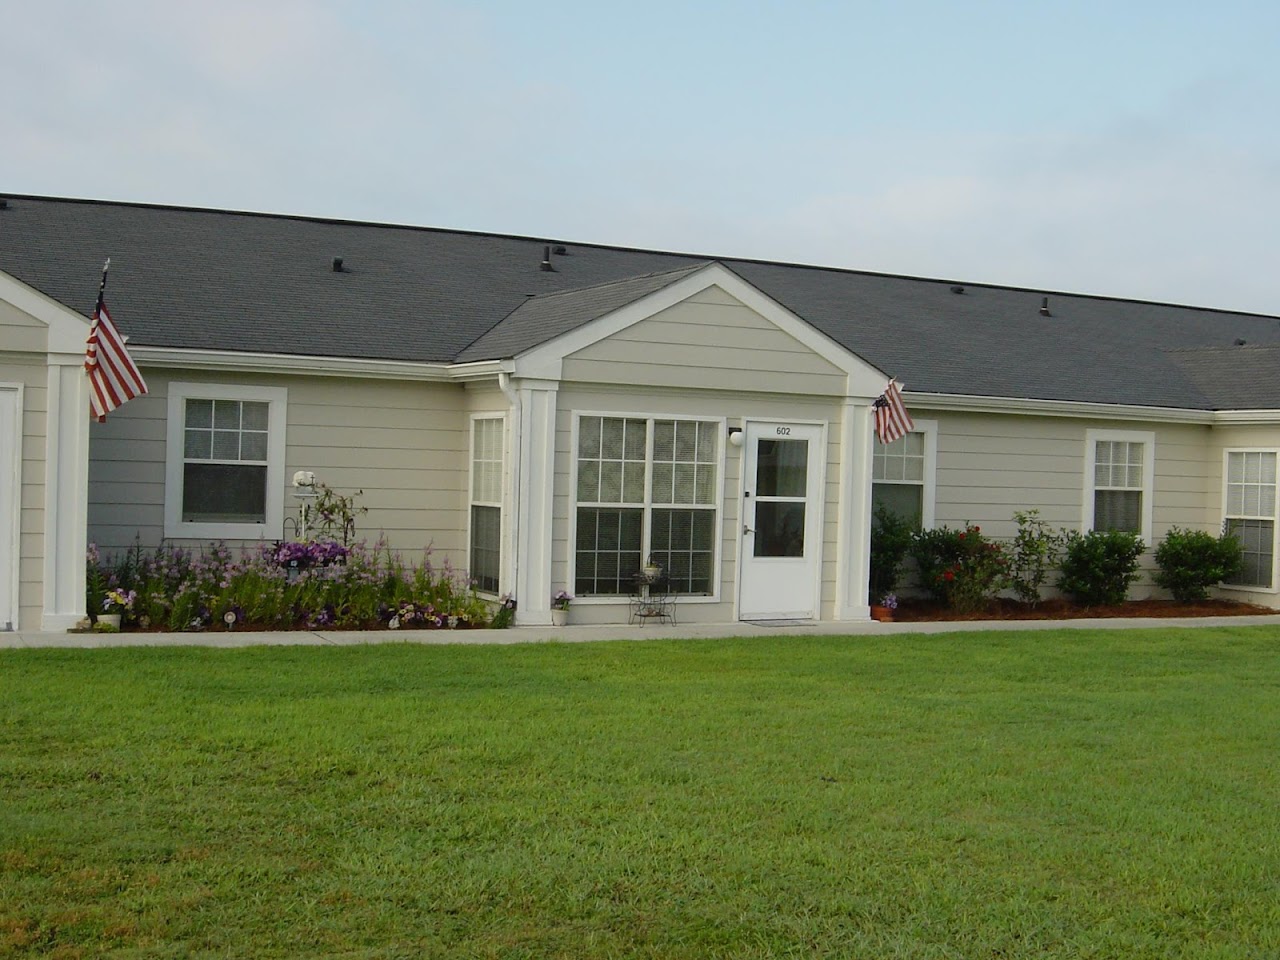 Photo of TIMBERLAND CROSSING APTS. Affordable housing located at 103 WHISPERING MAPLE DR CENTRAL, SC 29630